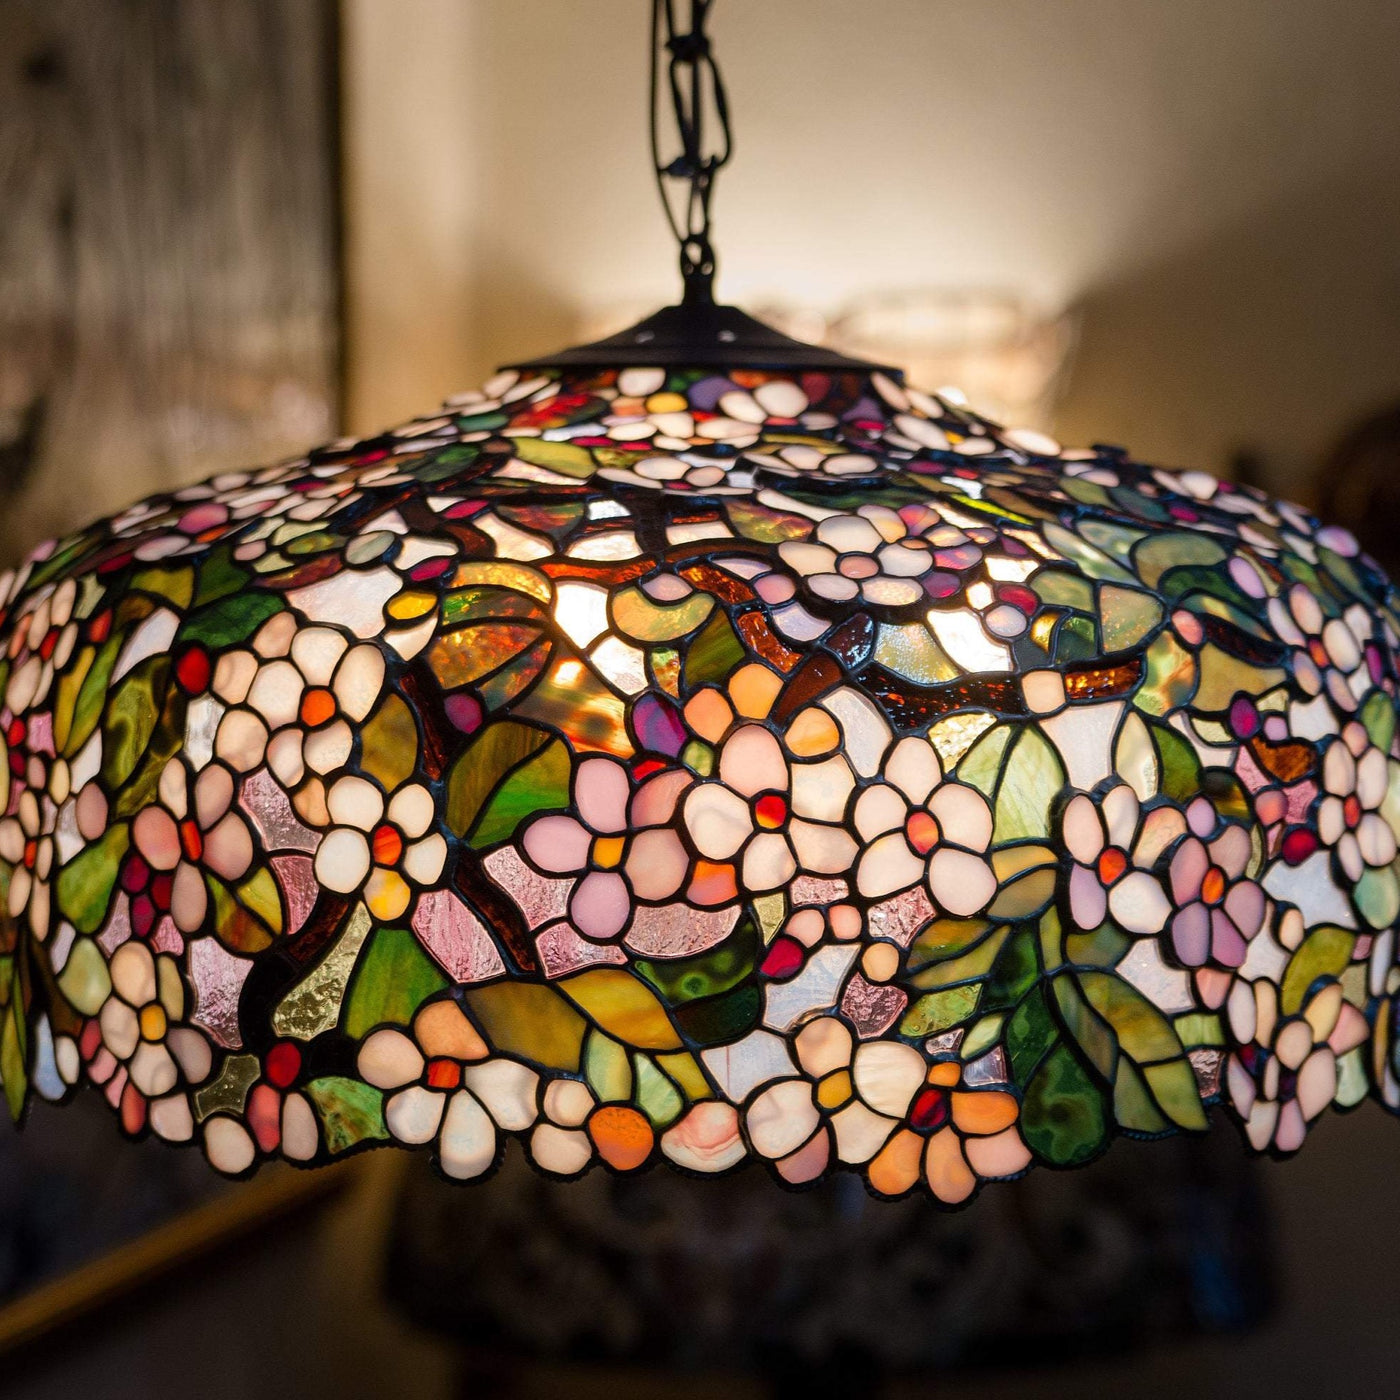 Lit stained glass cherry blossom chandelier